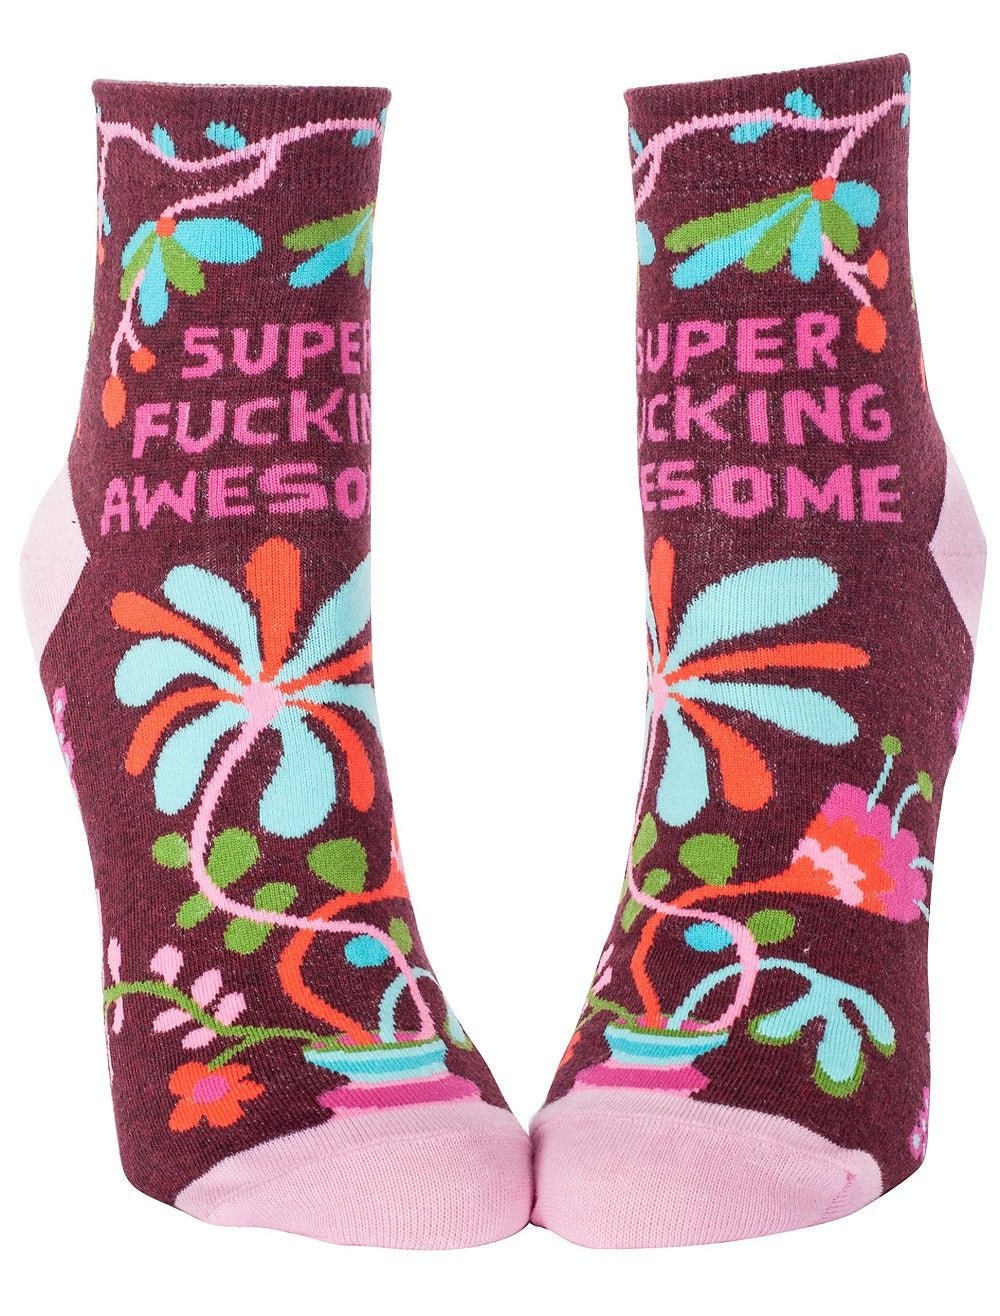 Blue Q Super Fucking Awesome Women's Ankle Socks